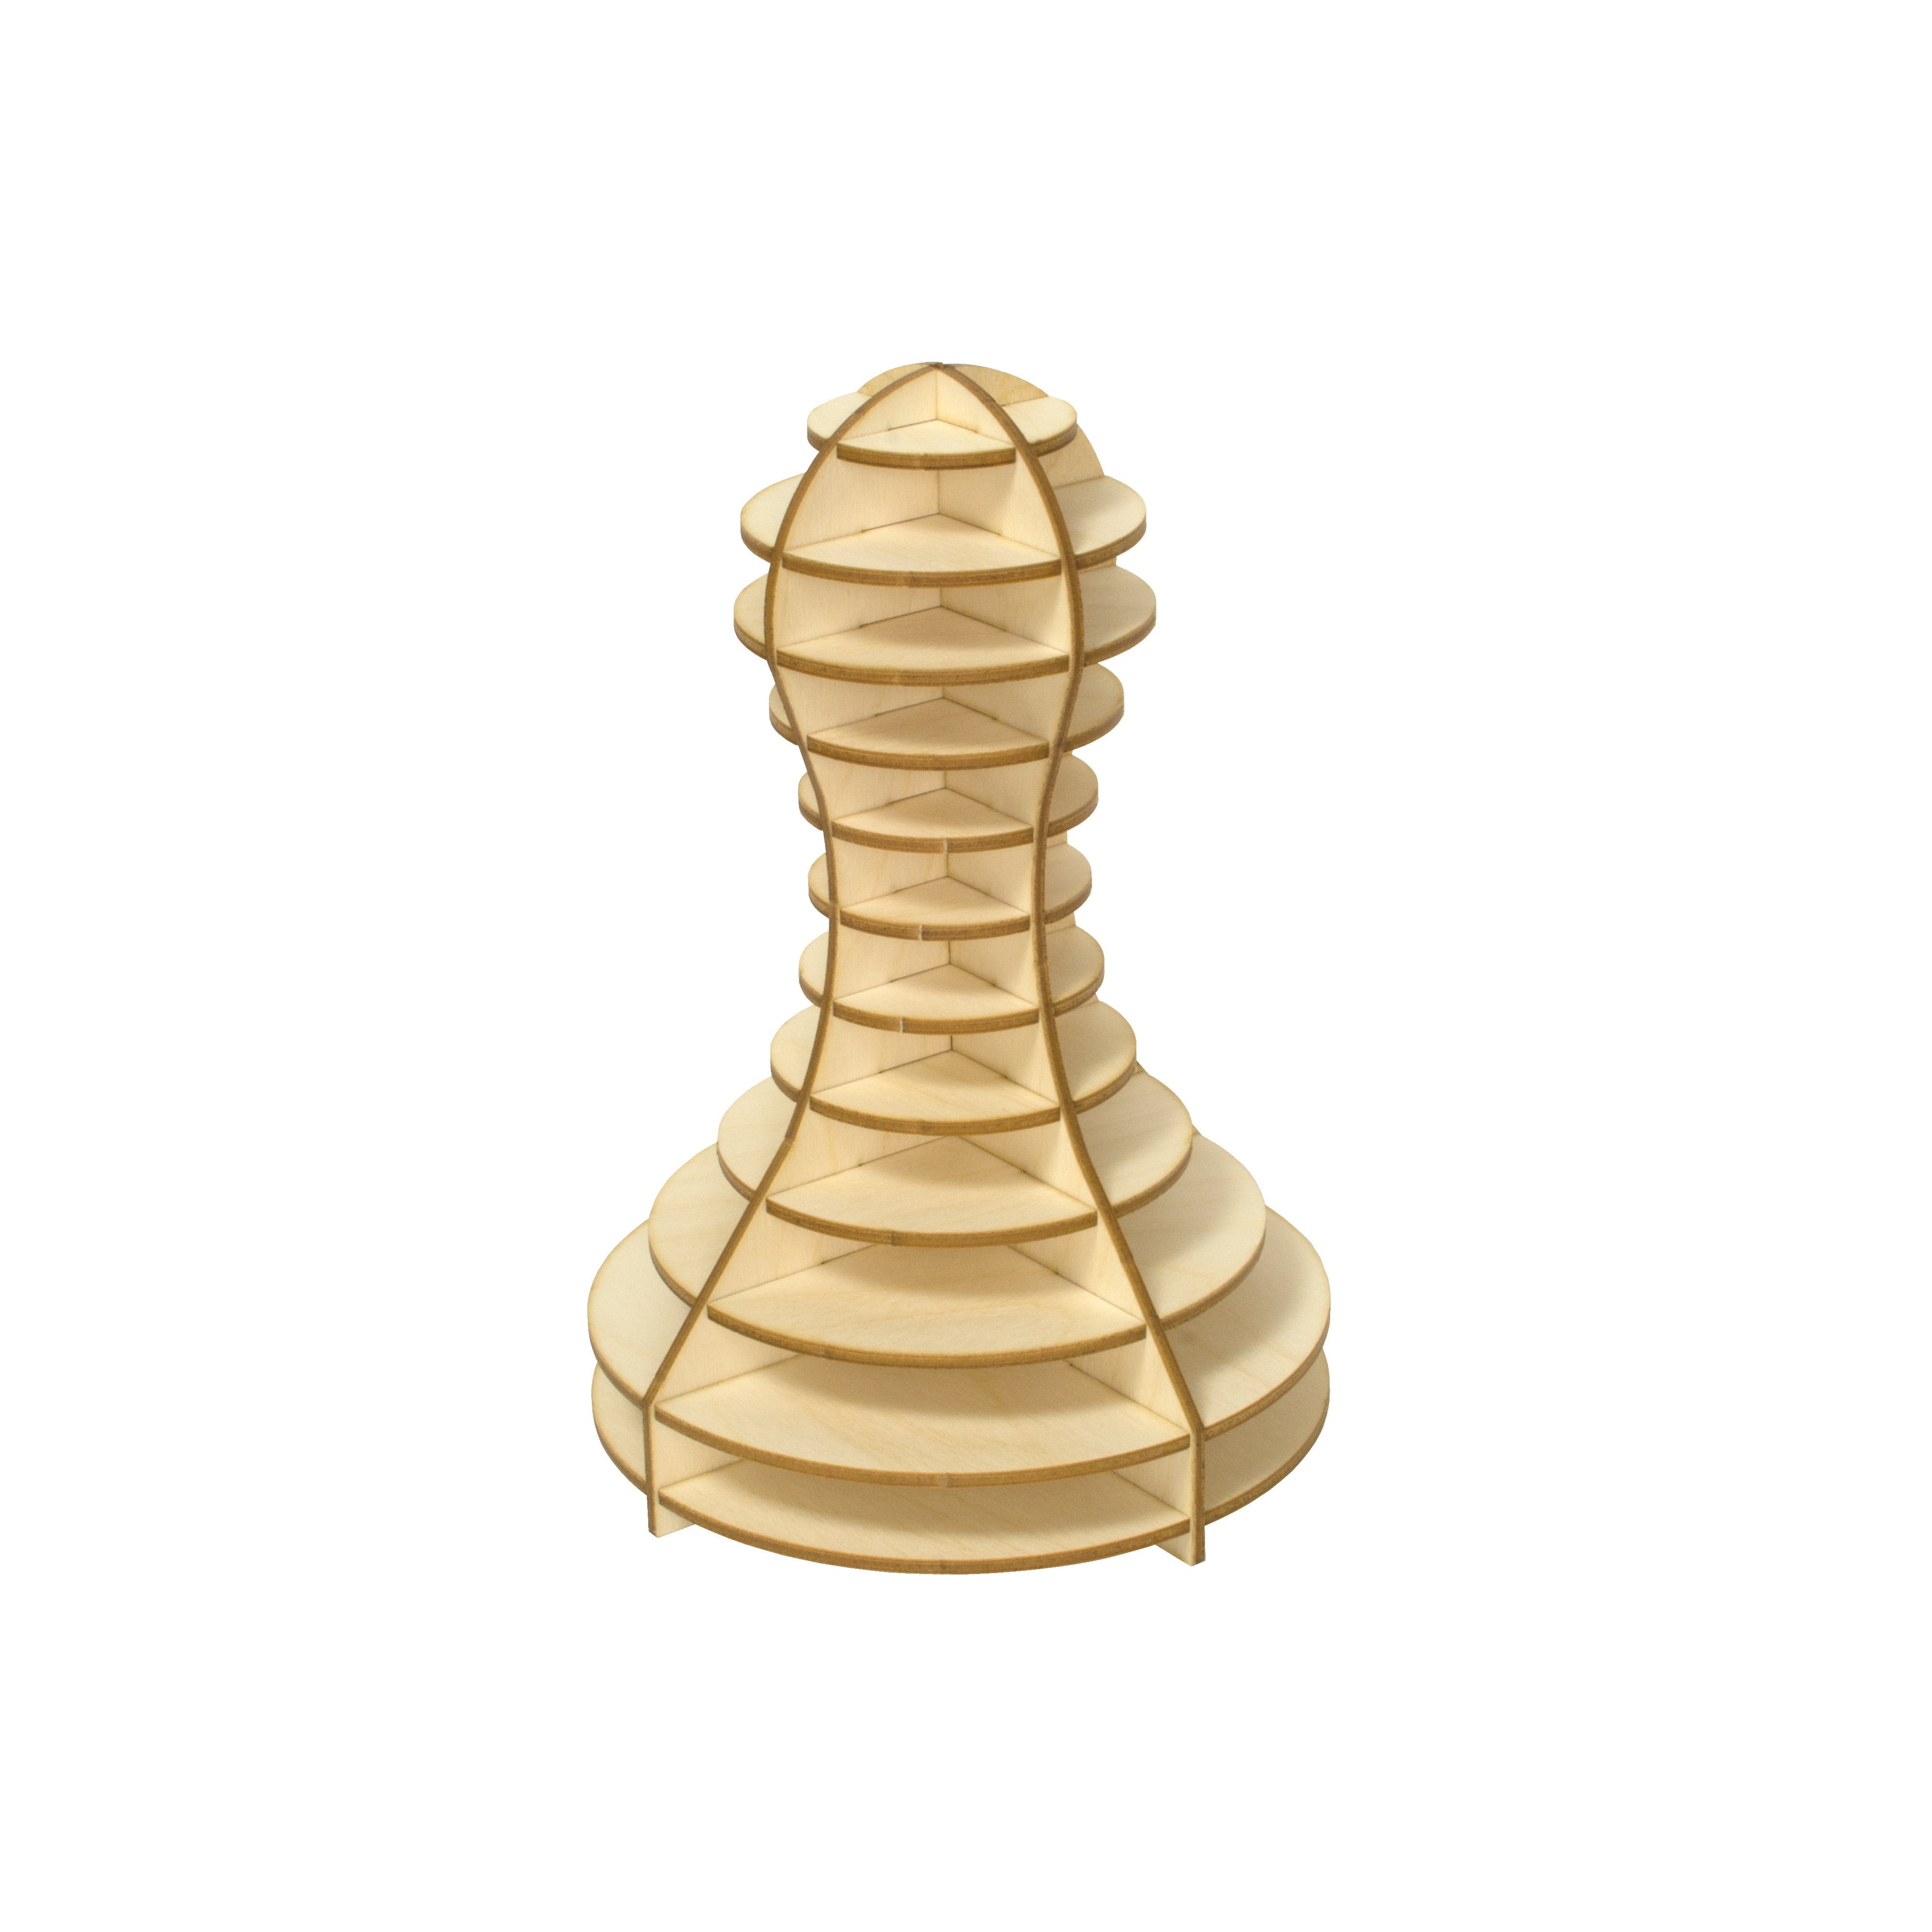 Wood Pawn Chess Piece - Antler Home